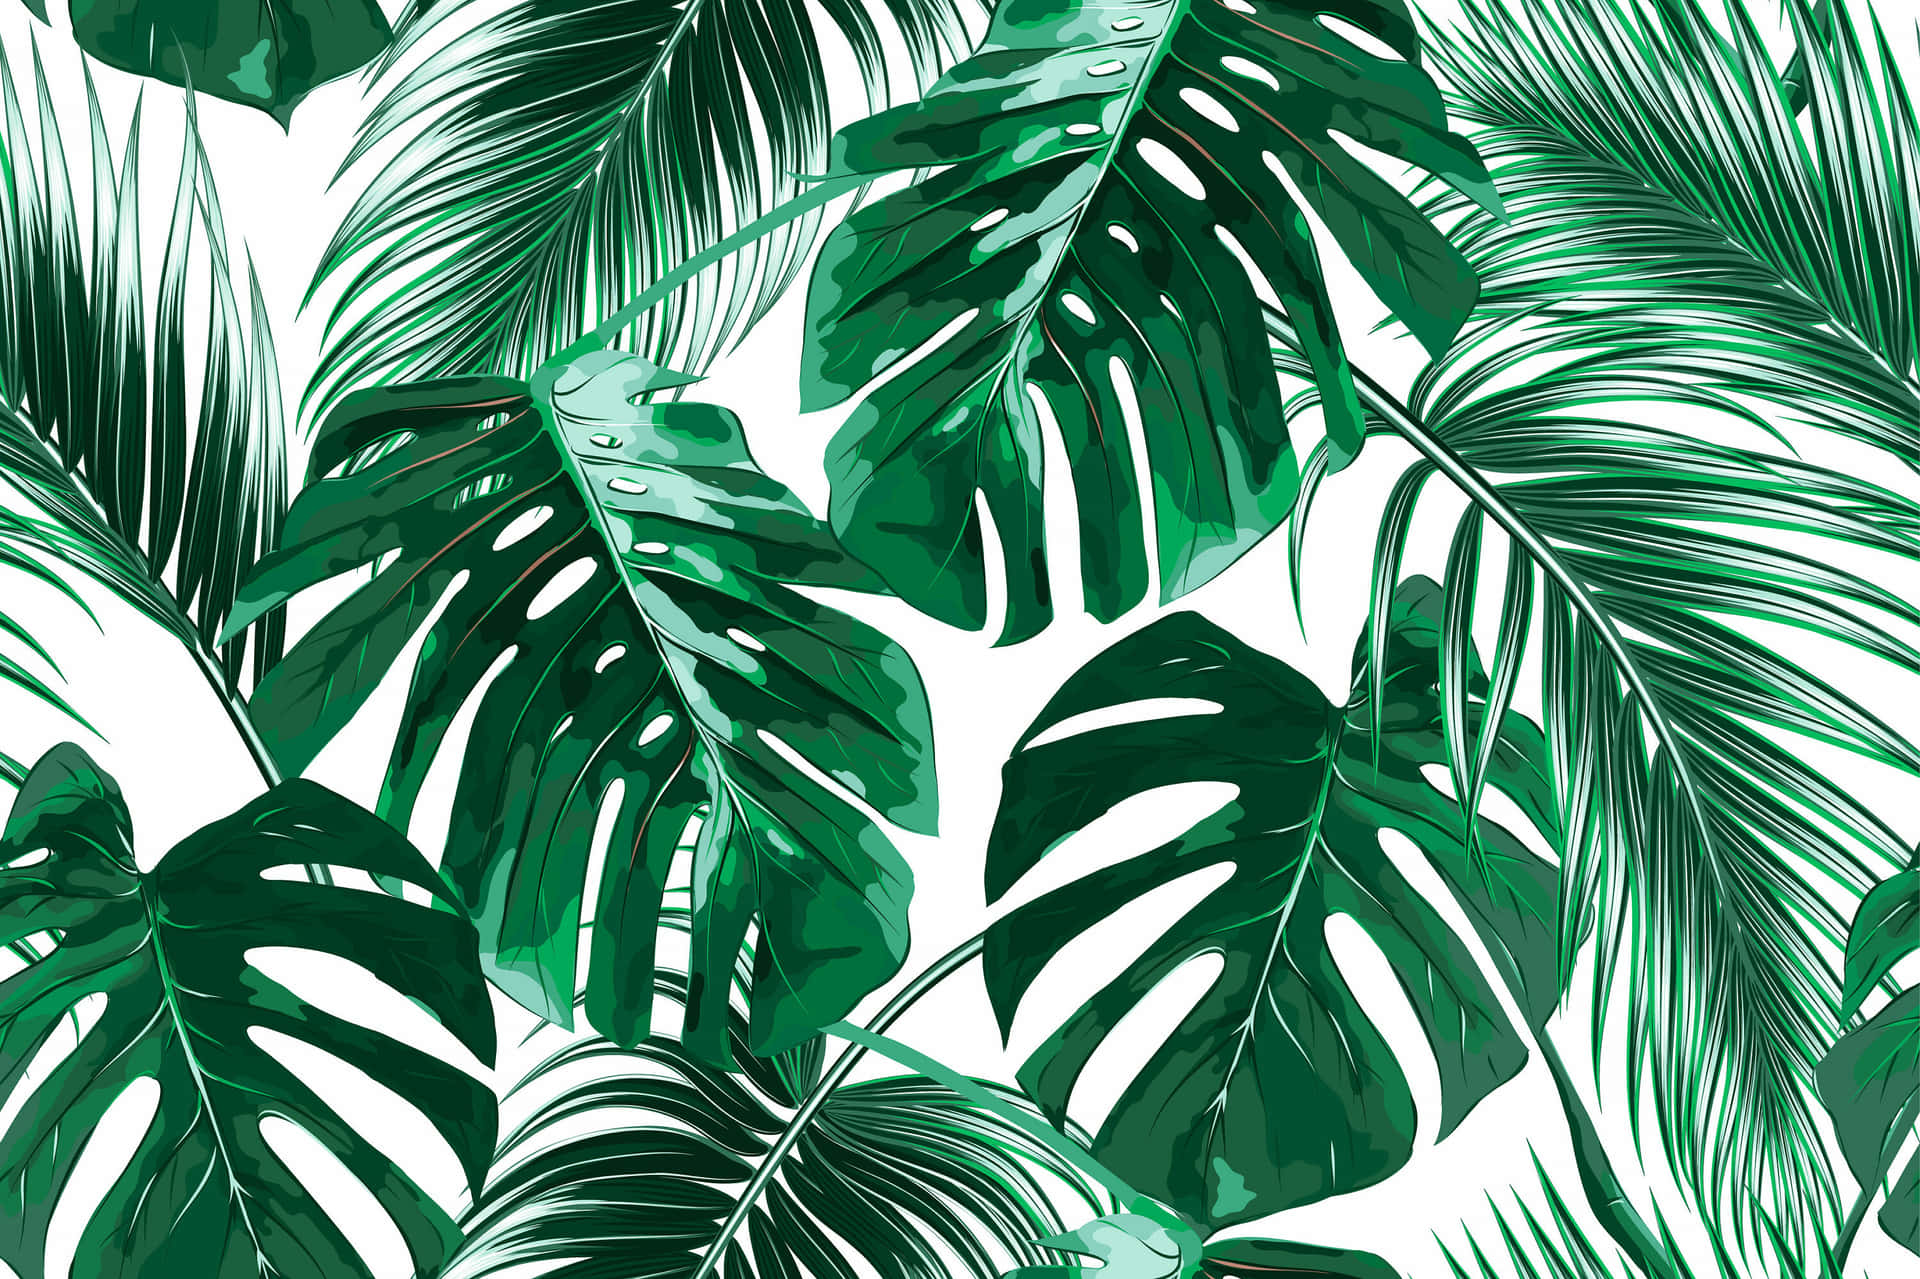 Enjoy the tropical vibes of lush green leaves